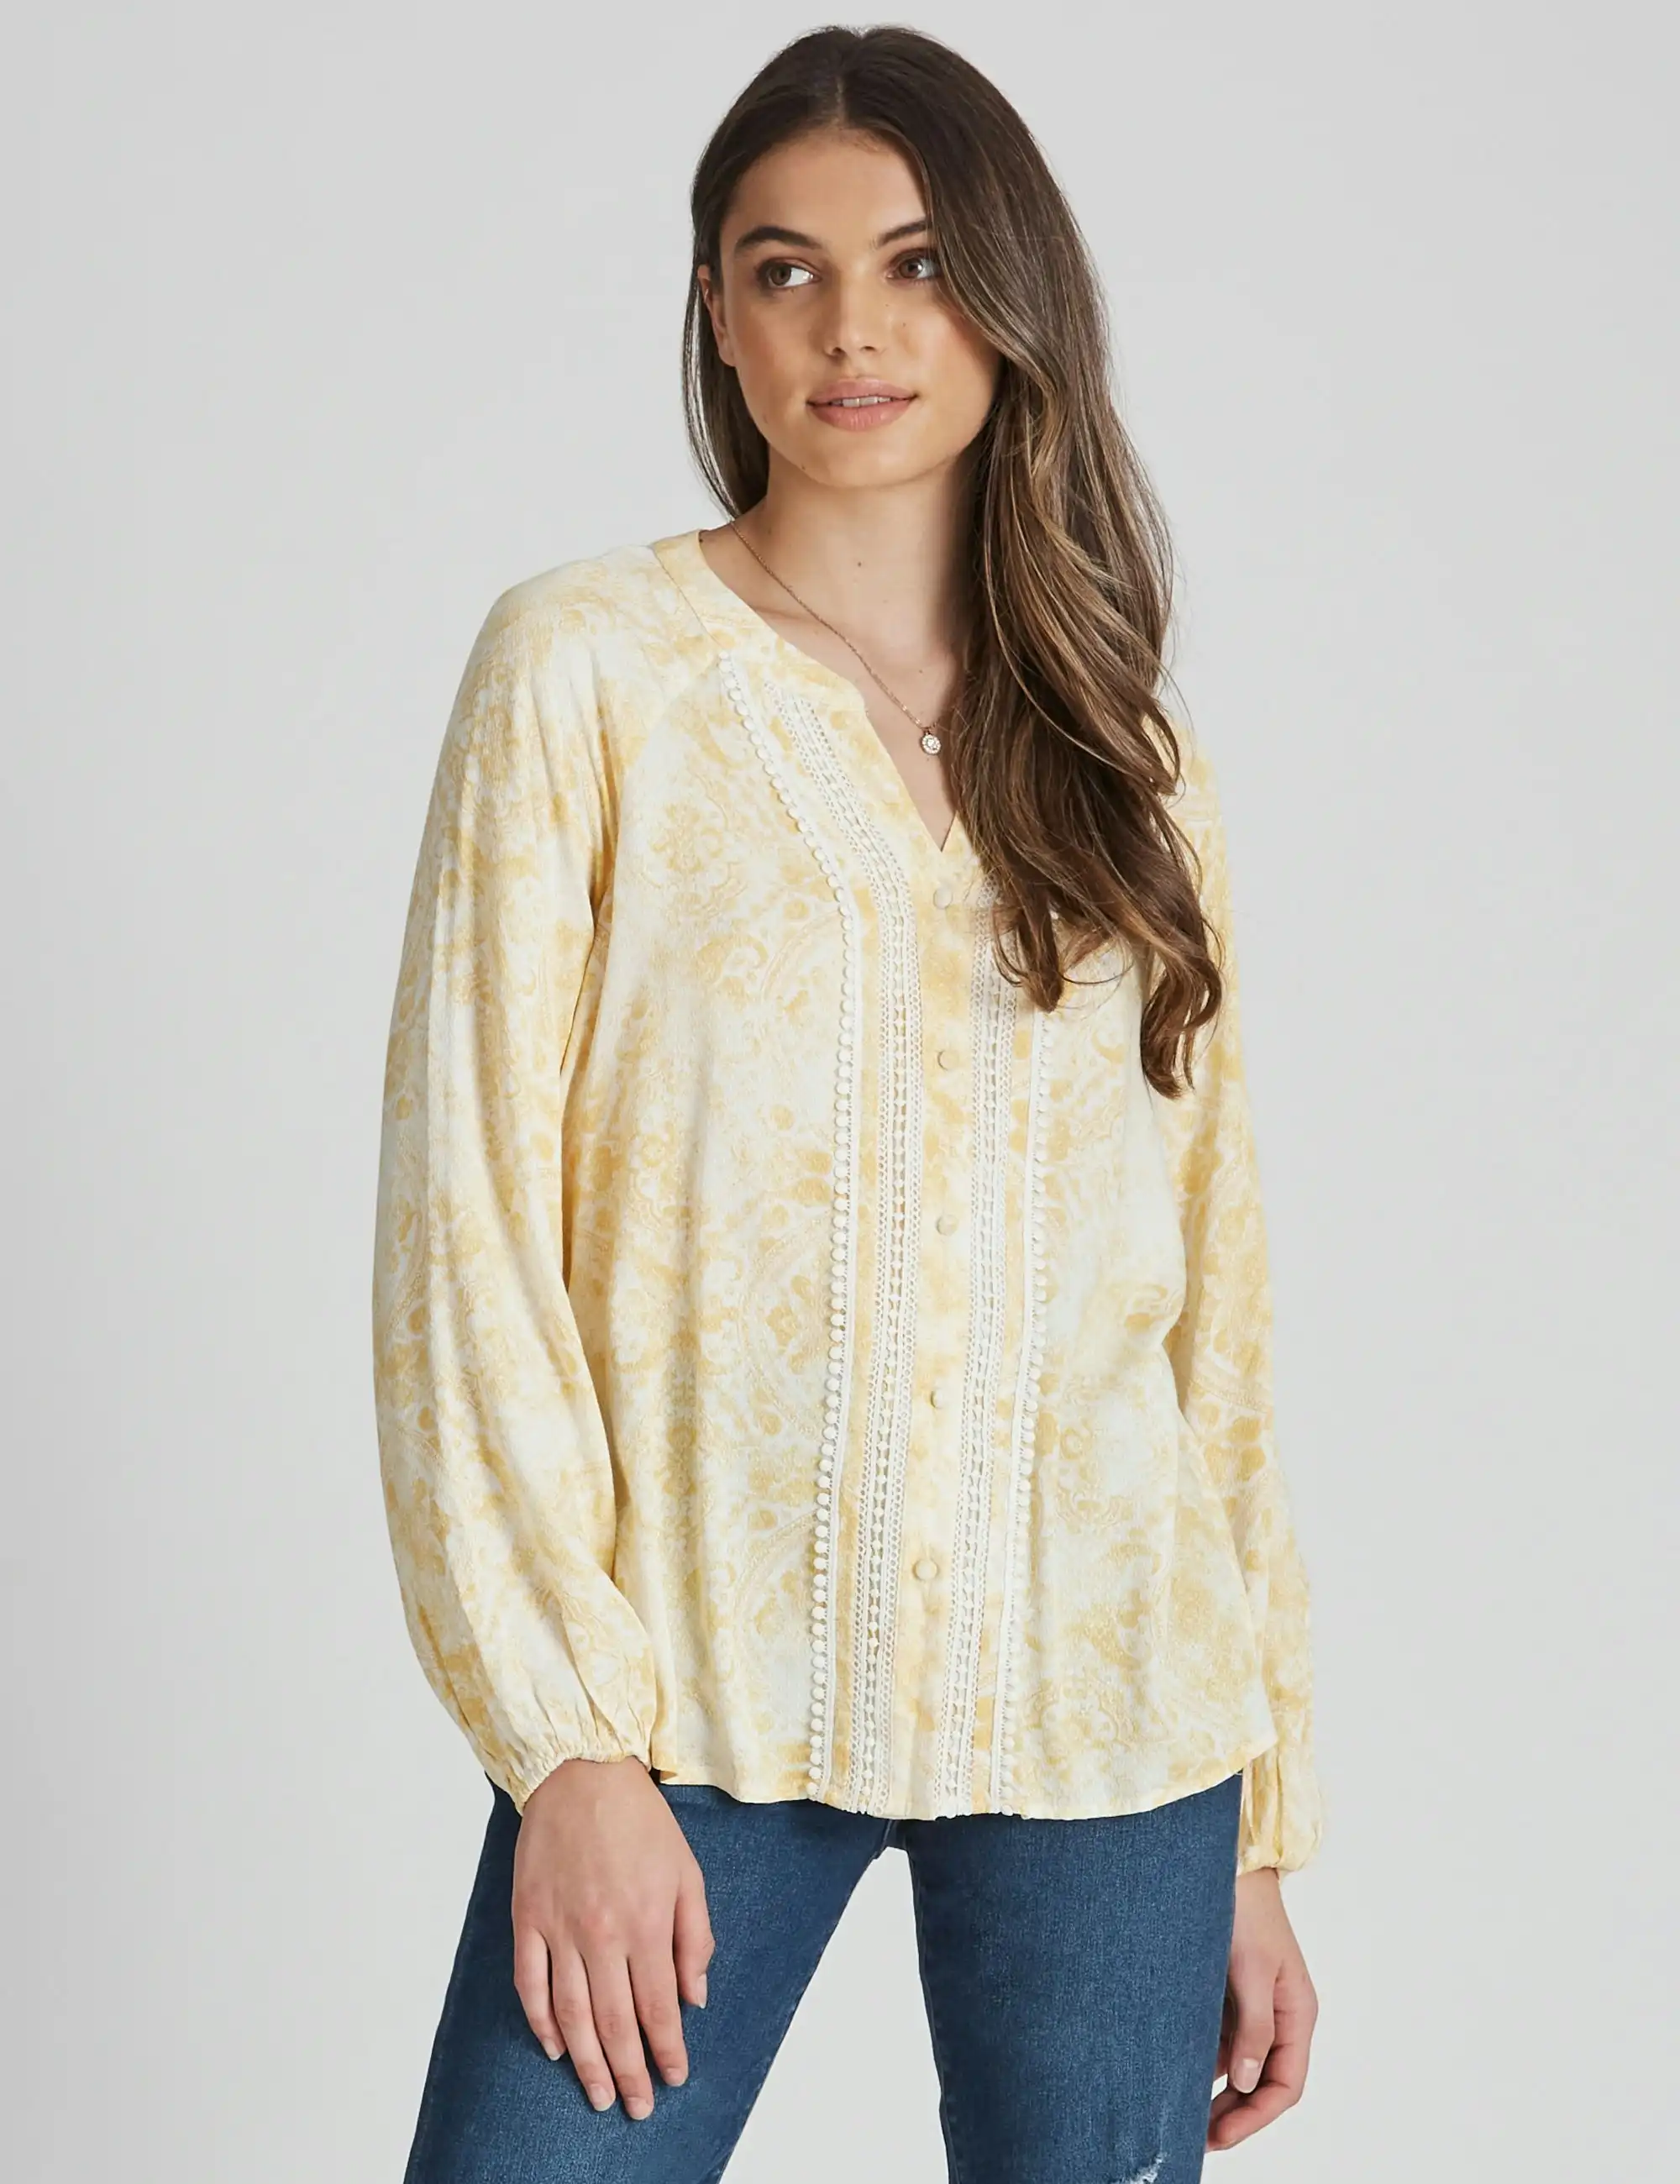 Rockmans 3/4 Sleeve Woven Lace Inset High Low Blouse (Yellow Paisley)